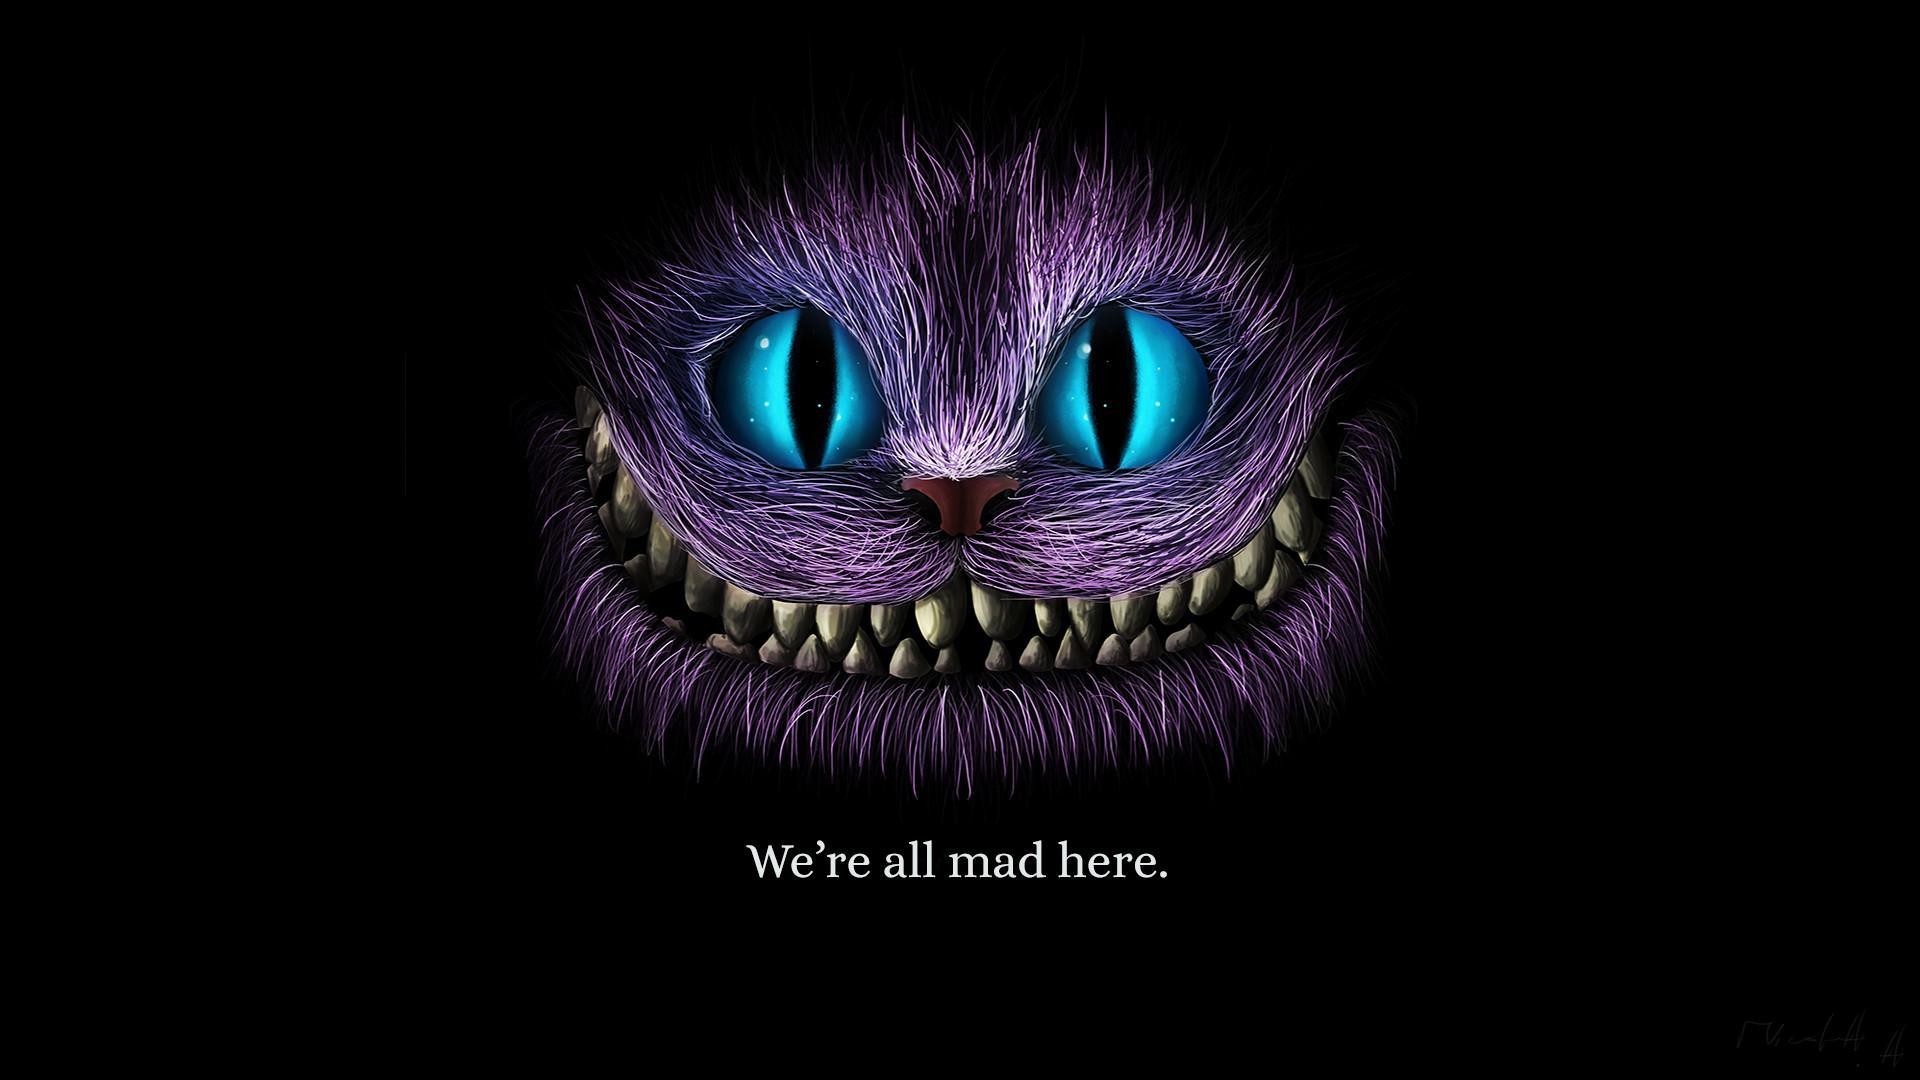 We Are All Mad Here Cheshire Cat Wallpaper, HD Artist 4K Wallpaper, Image, Photo and Background